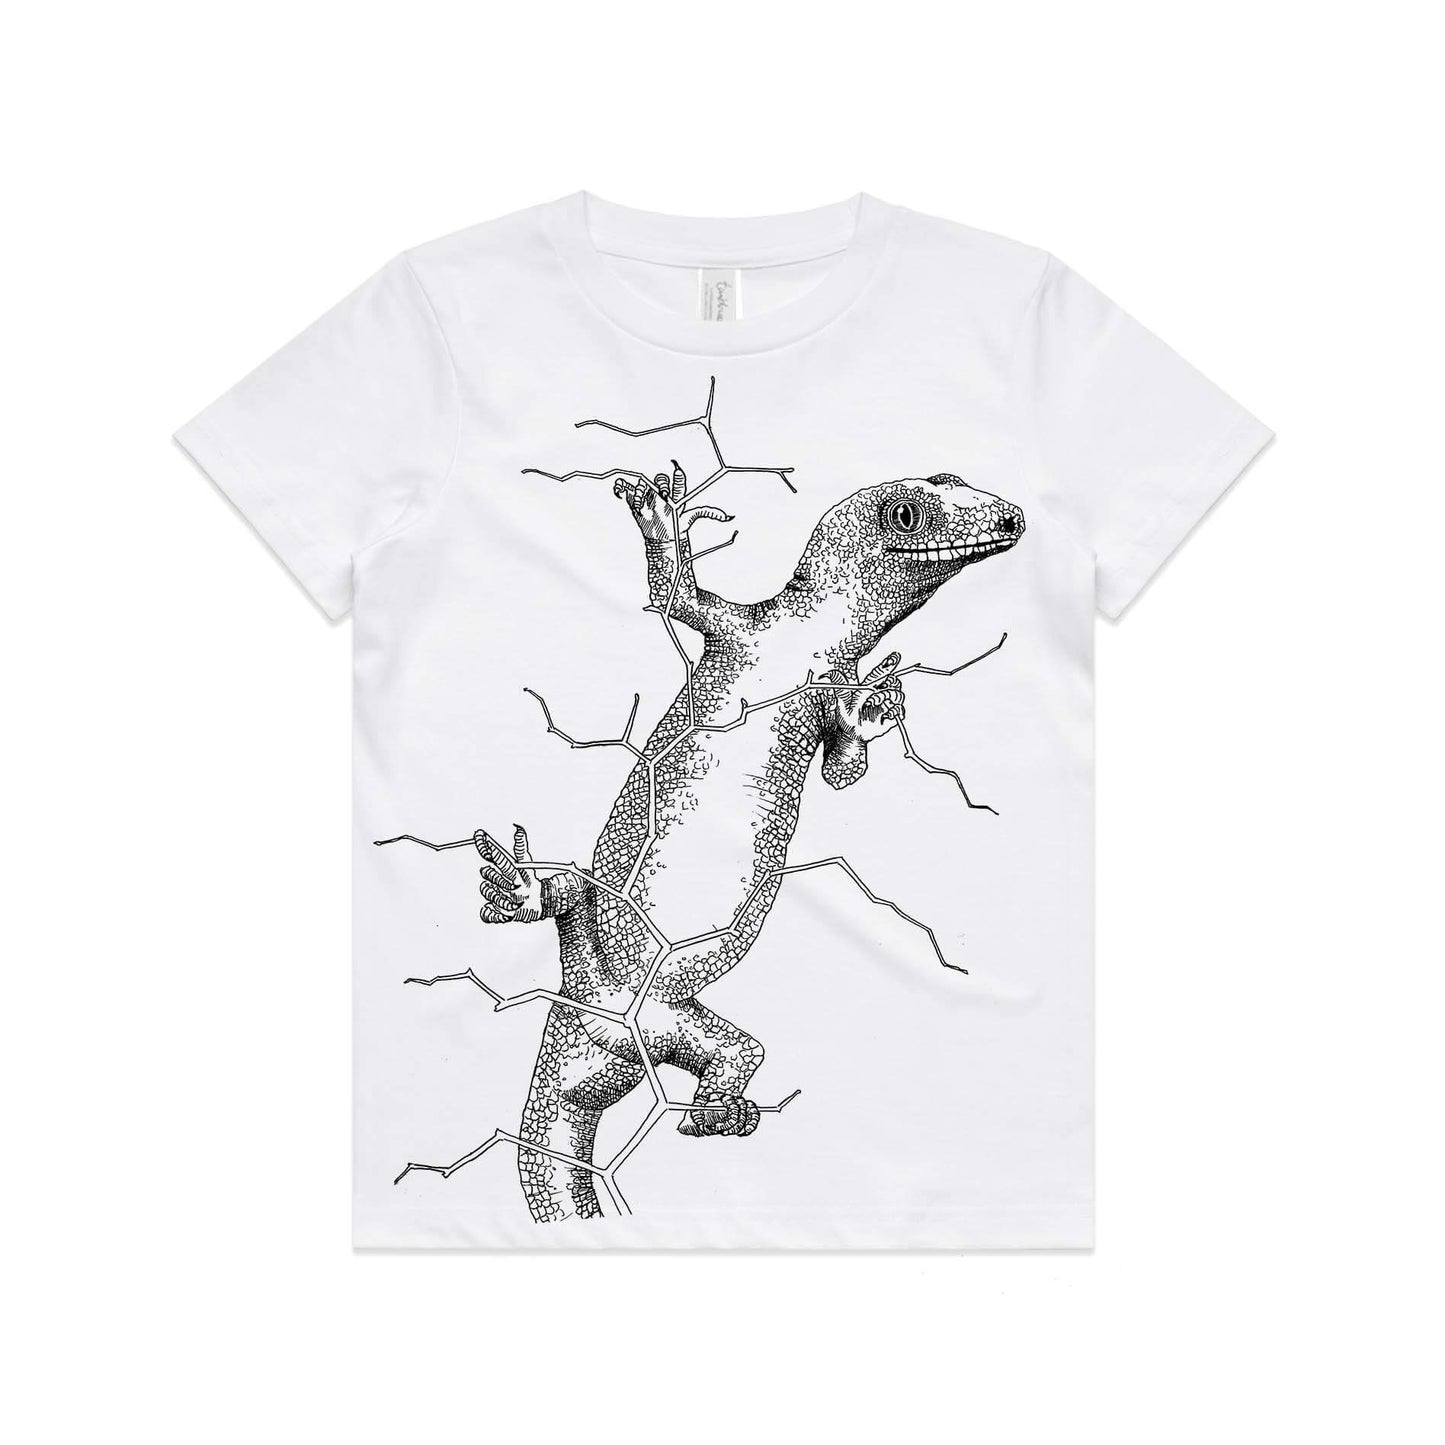 White, cotton kids' t-shirt with screen printed gecko design.